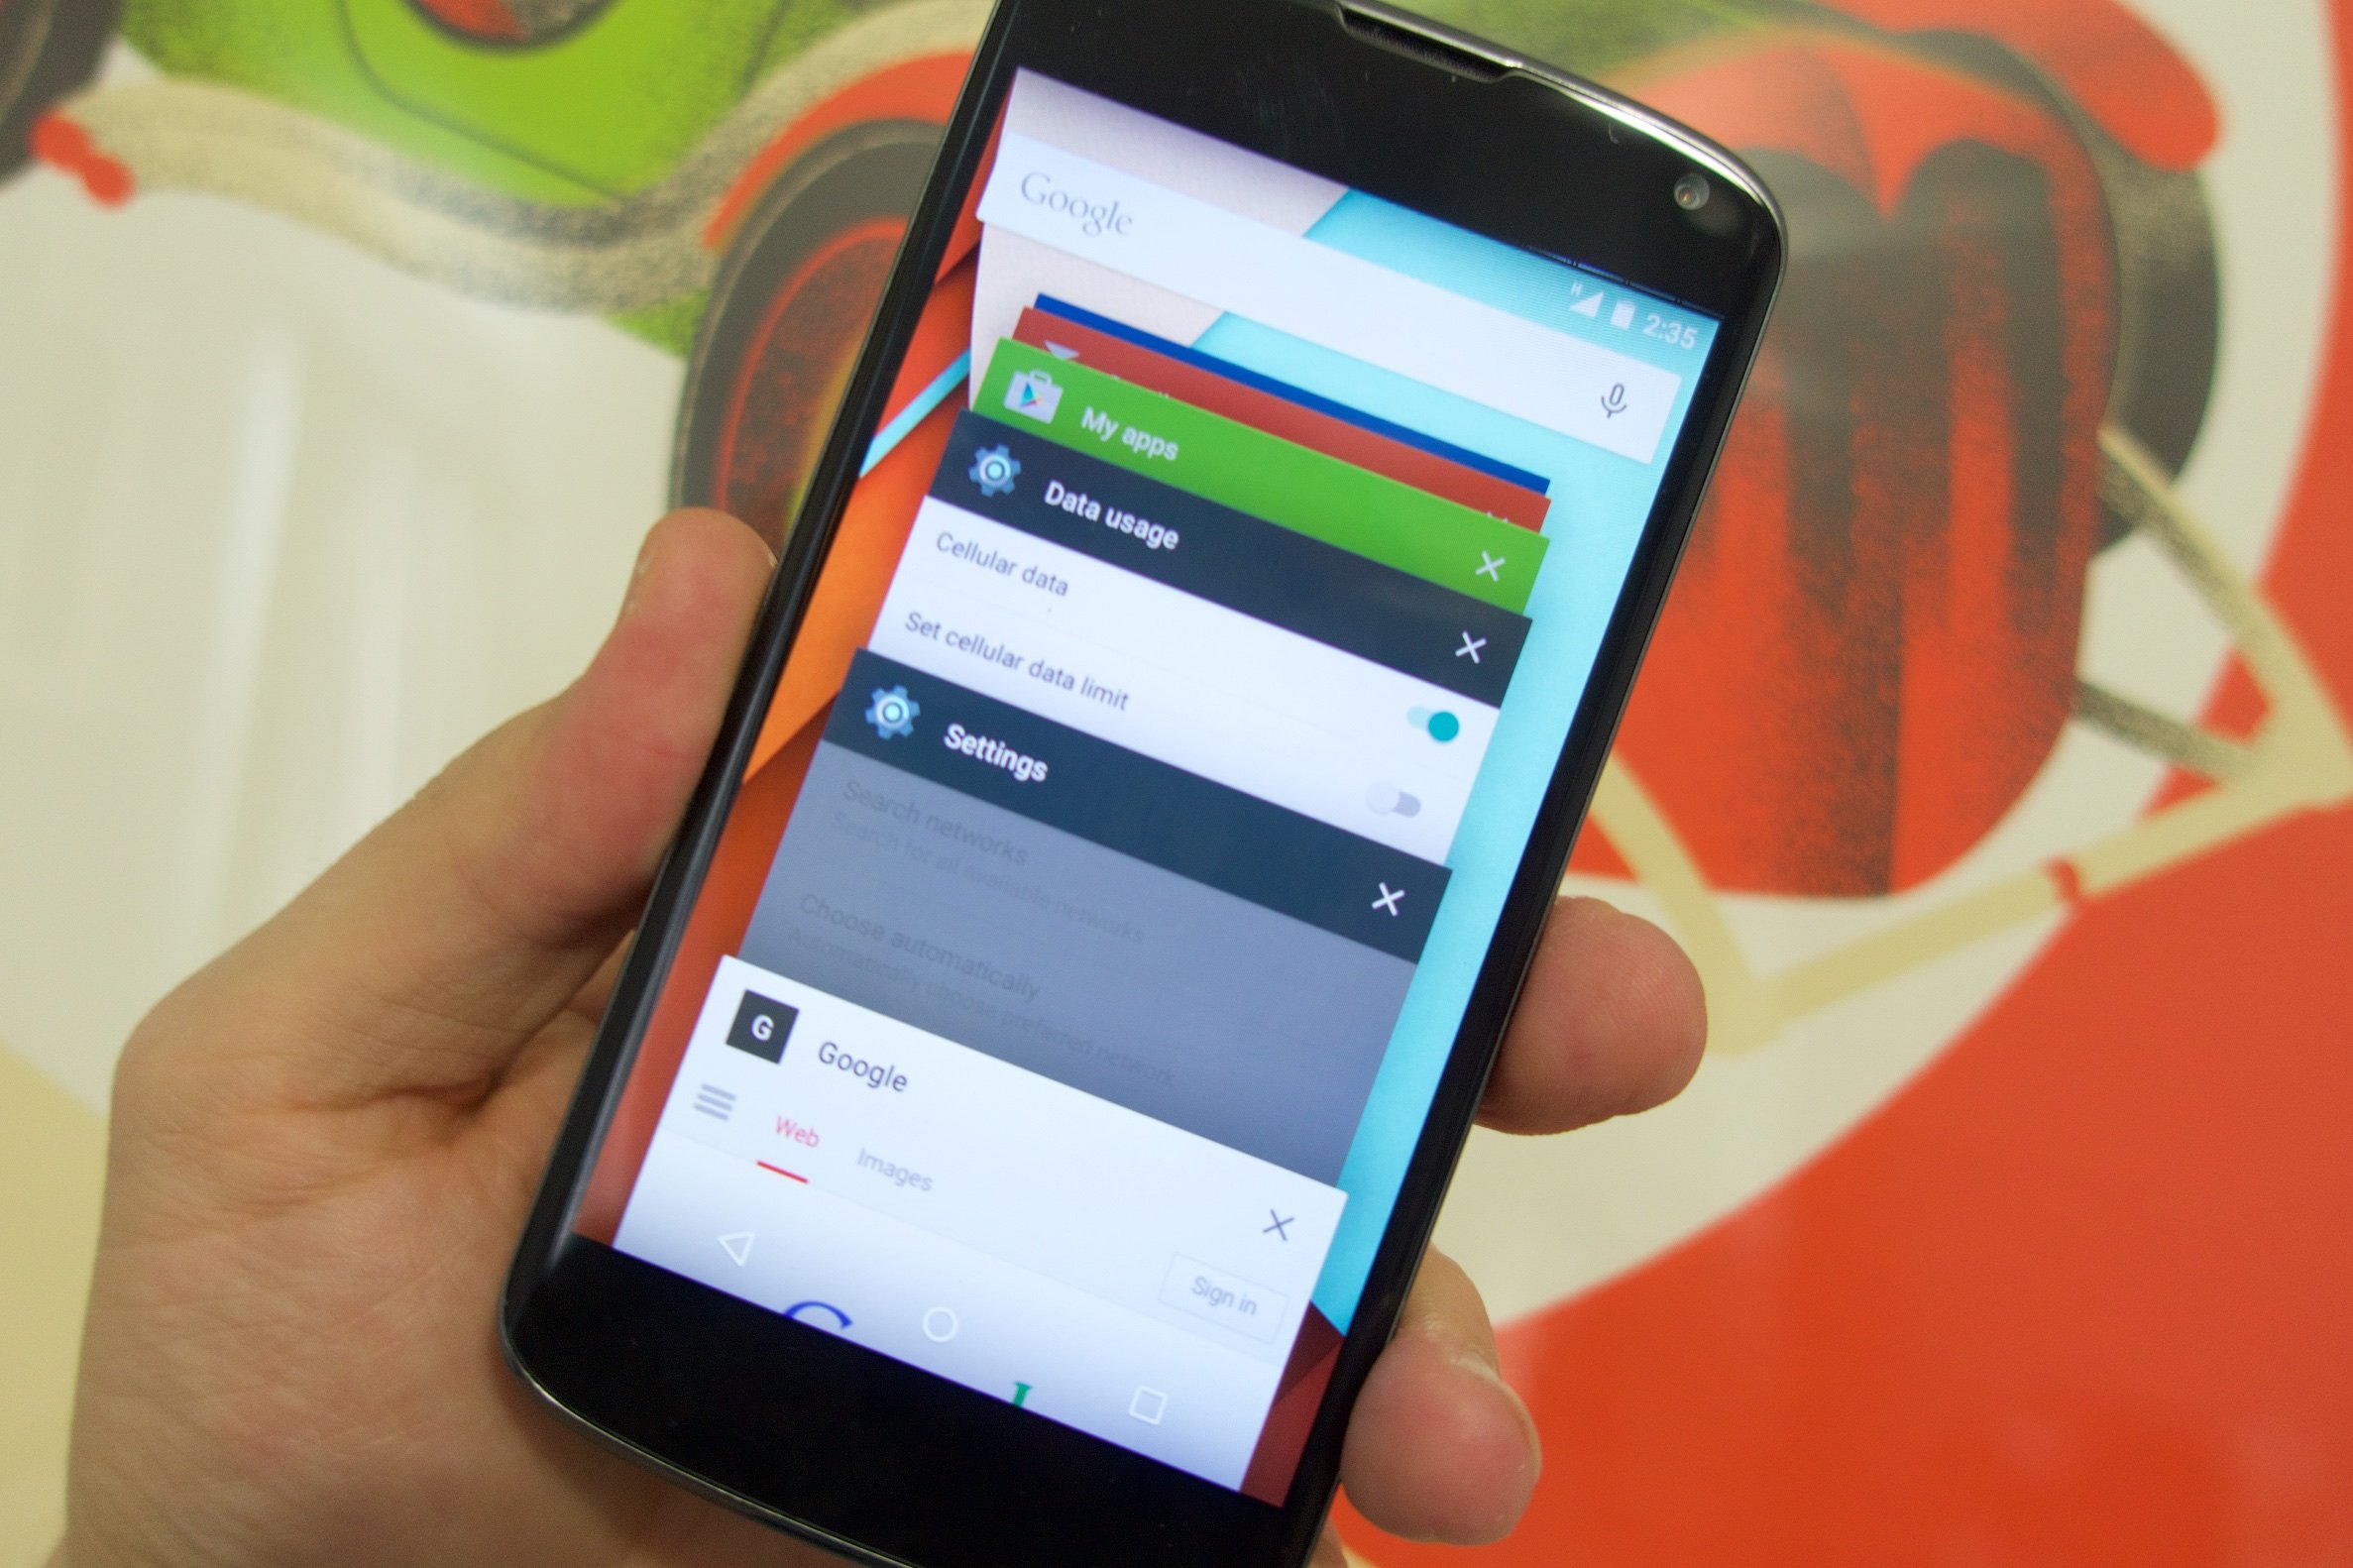 Most users can go ahead and install the Nexus 4 Android 5.0.1 update.